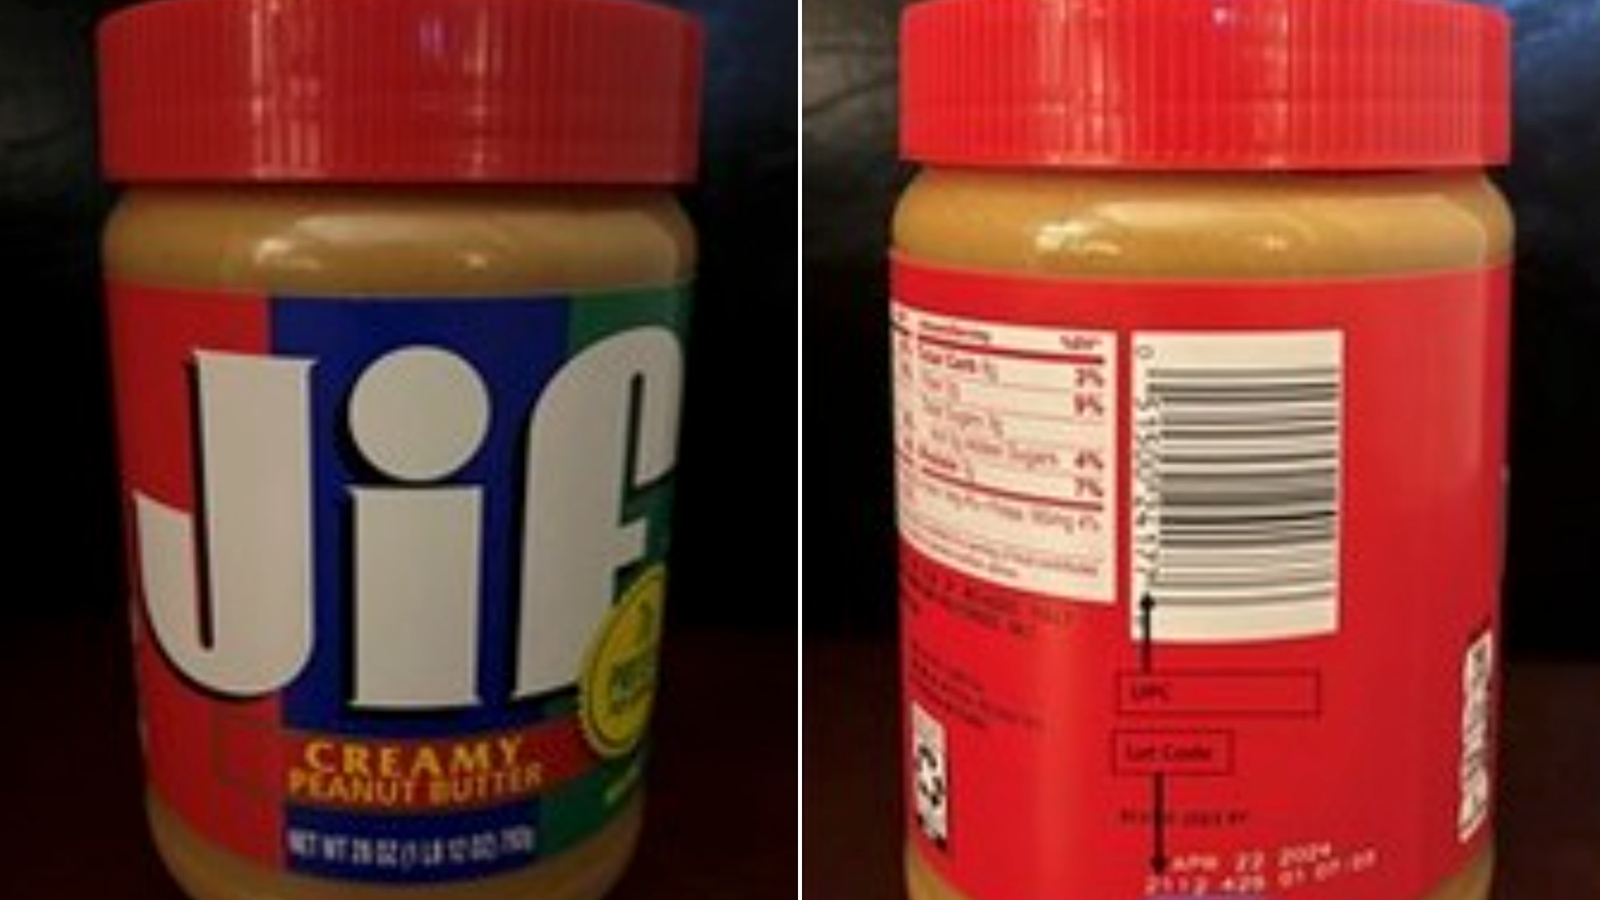 J.M. Smucker is recalling some Jif peanut butter products due to salmonella. (Credit: The J.M. Smuc...